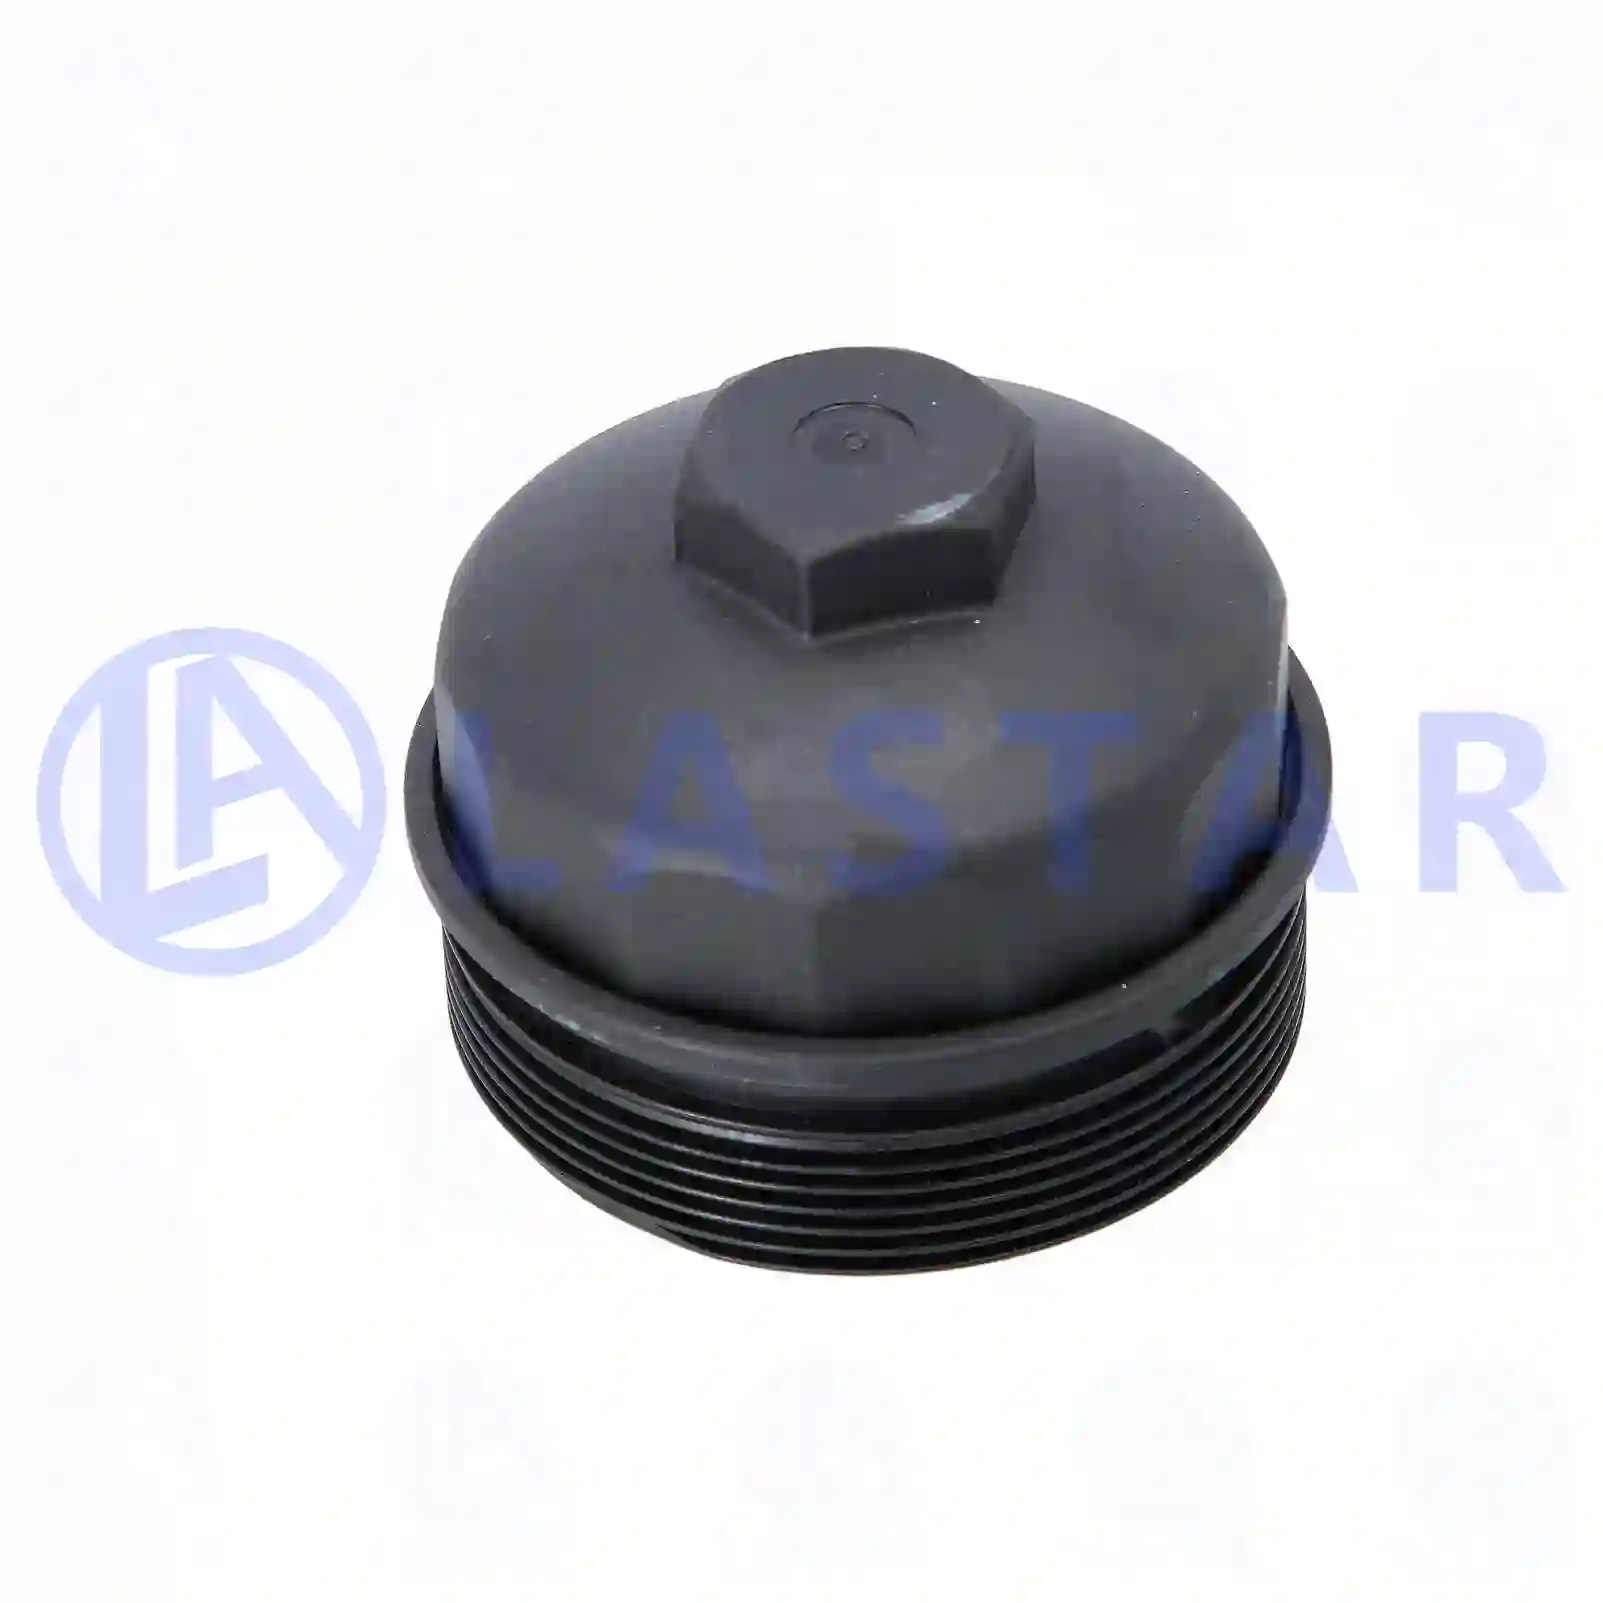  Oil filter cover || Lastar Spare Part | Truck Spare Parts, Auotomotive Spare Parts